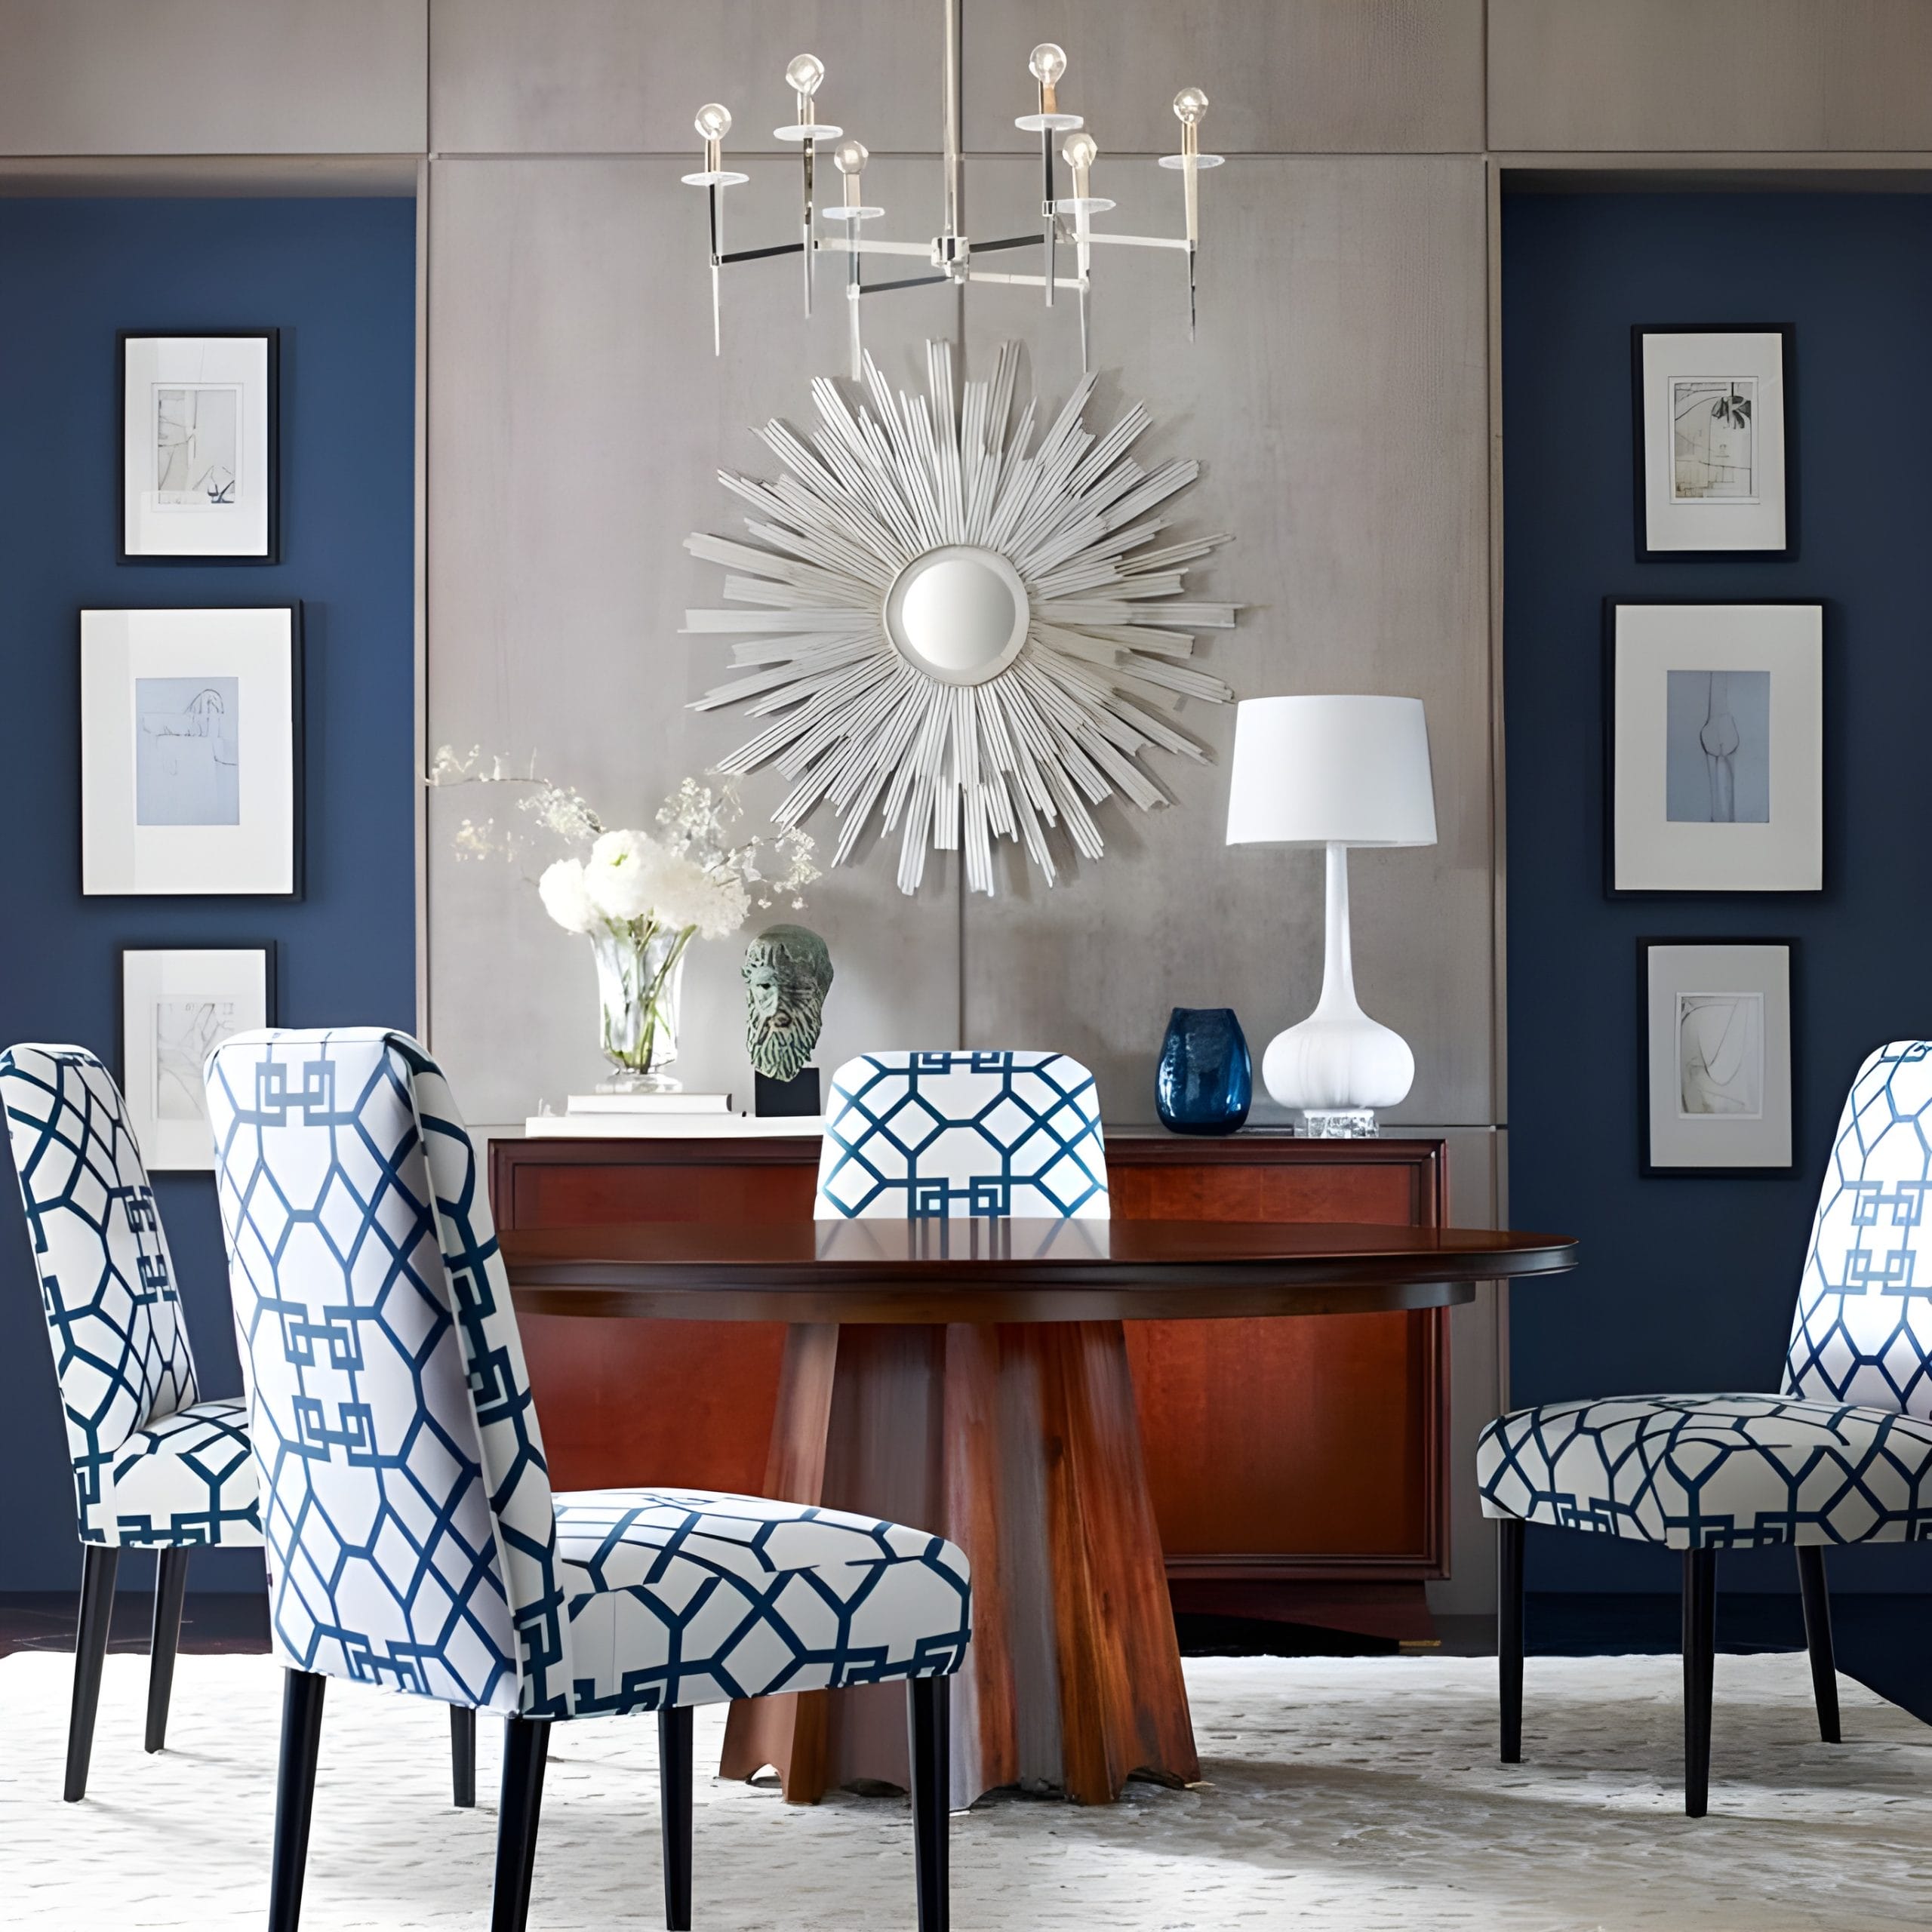 Use art in interior design to achieve symmetry like in a dining room by Decorilla